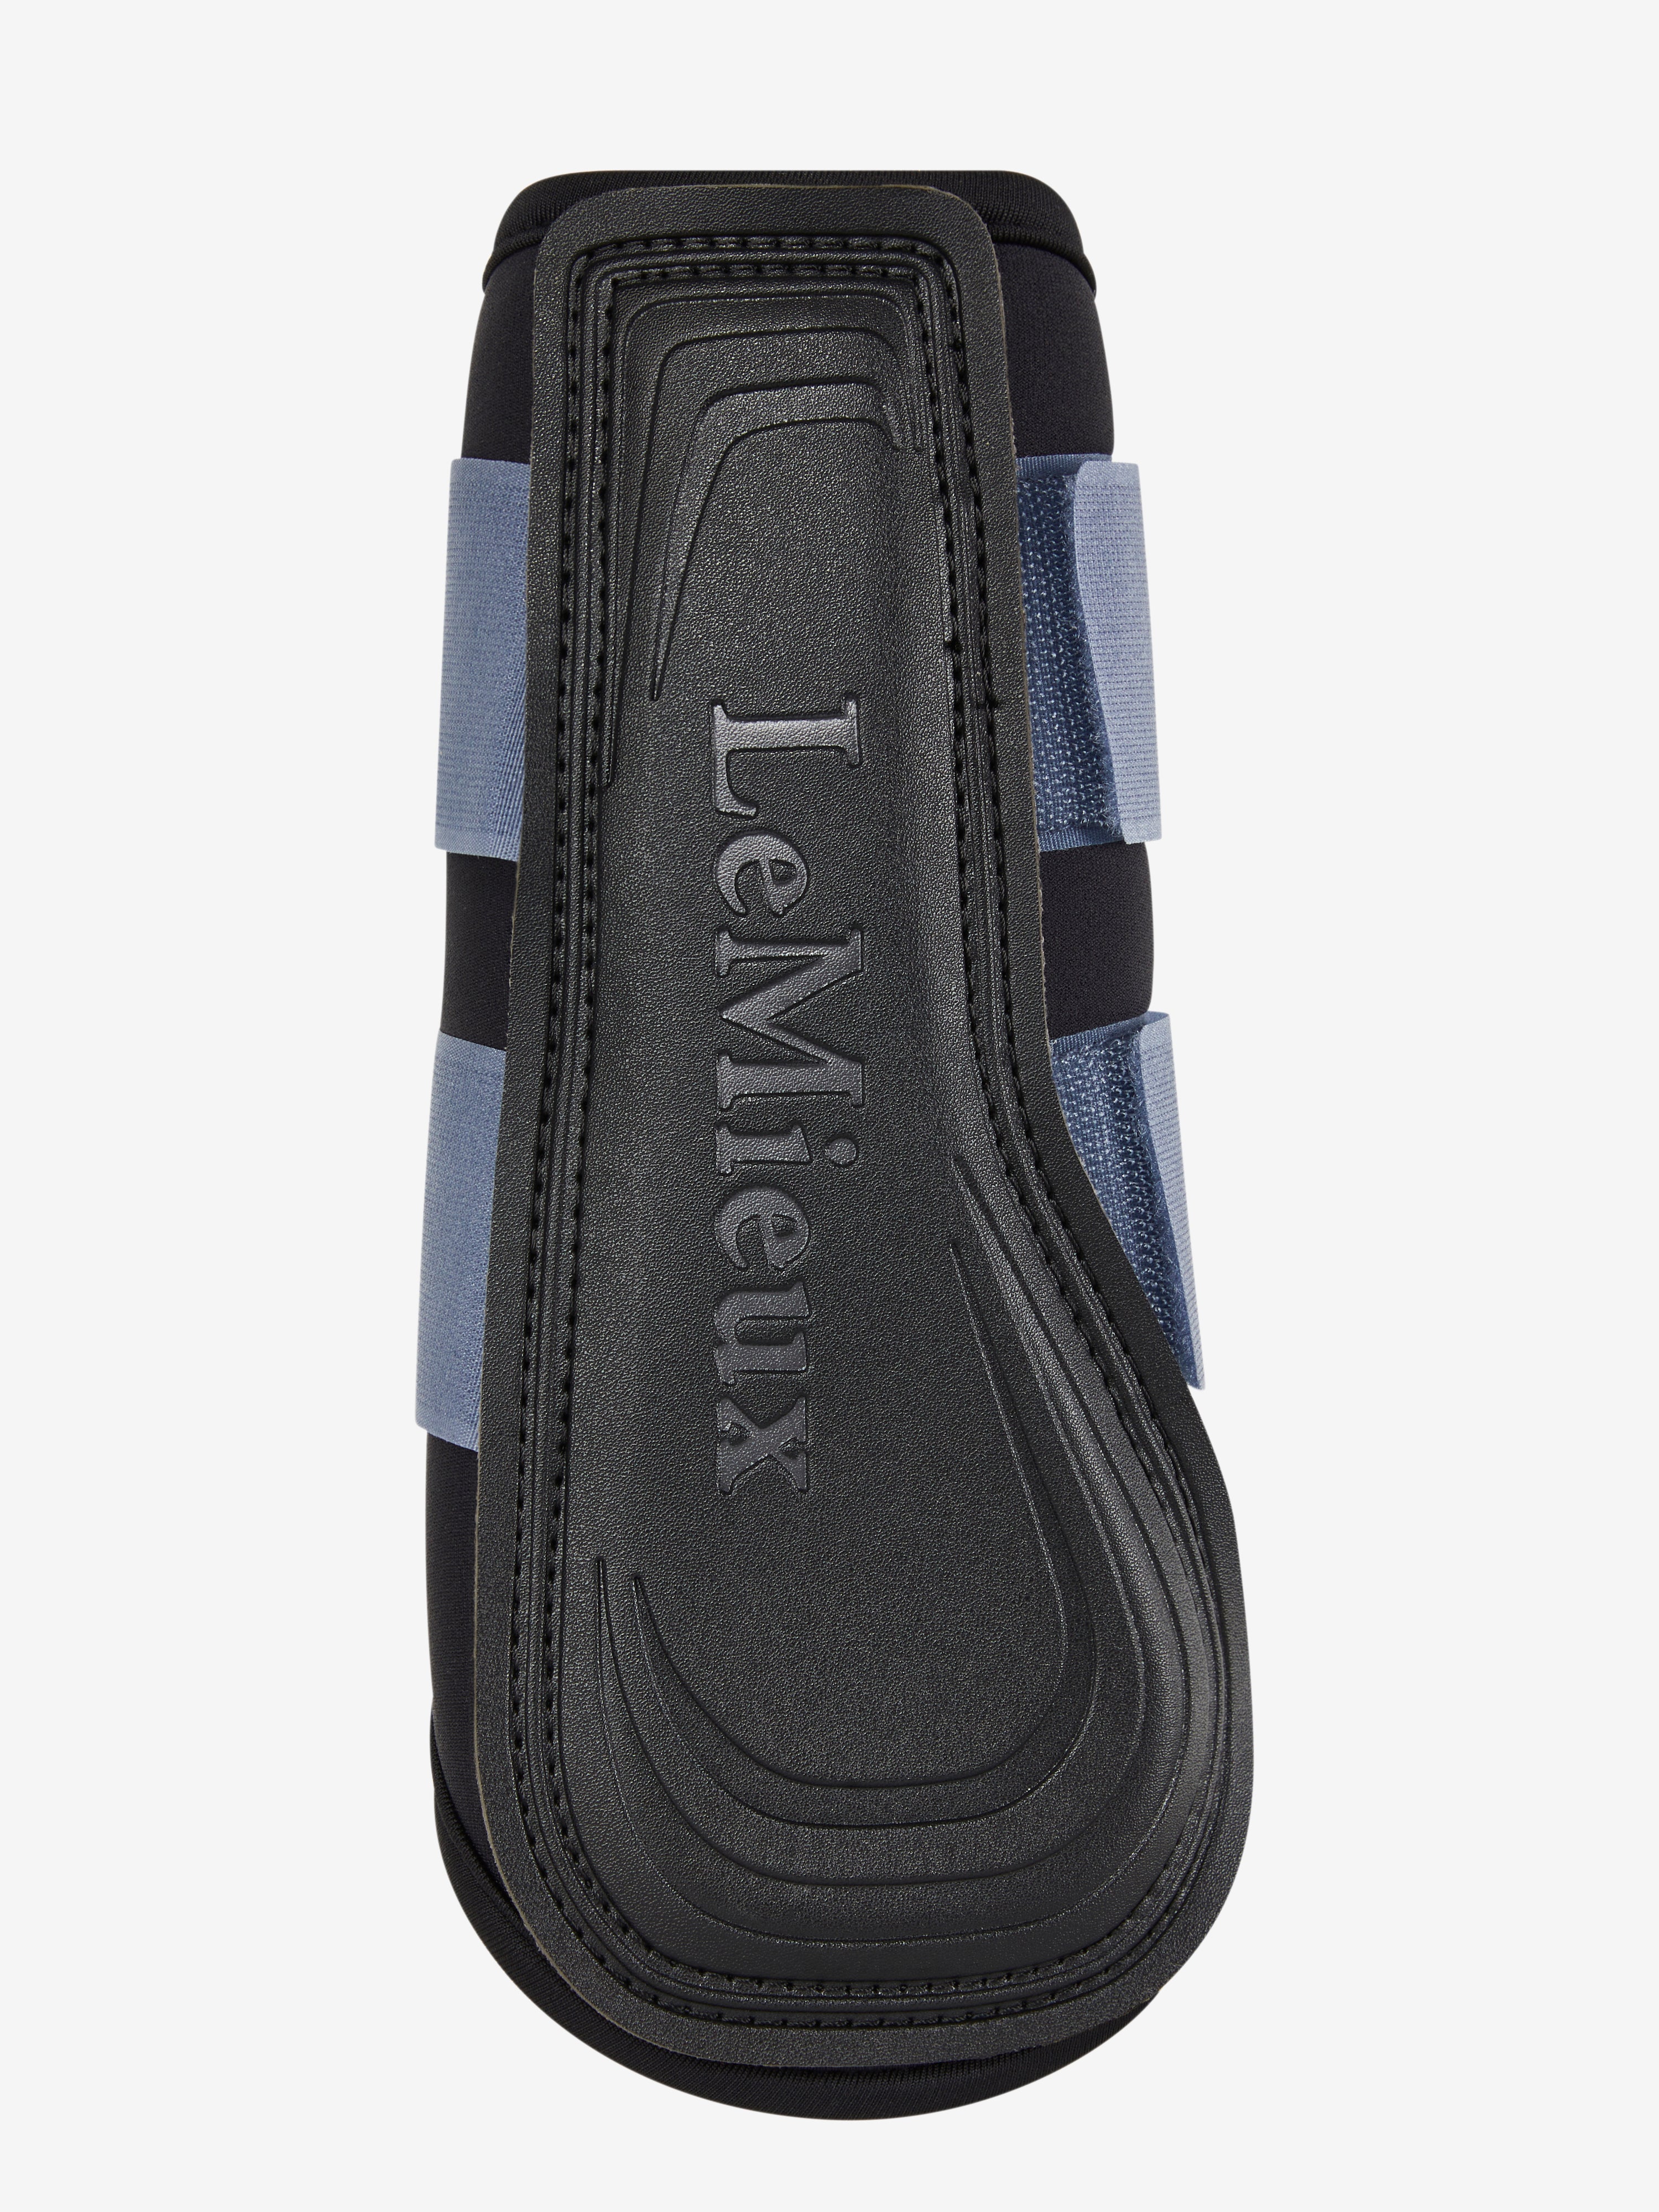 LeMieux Grafter Brushing Boots - Spring/Summer 2024